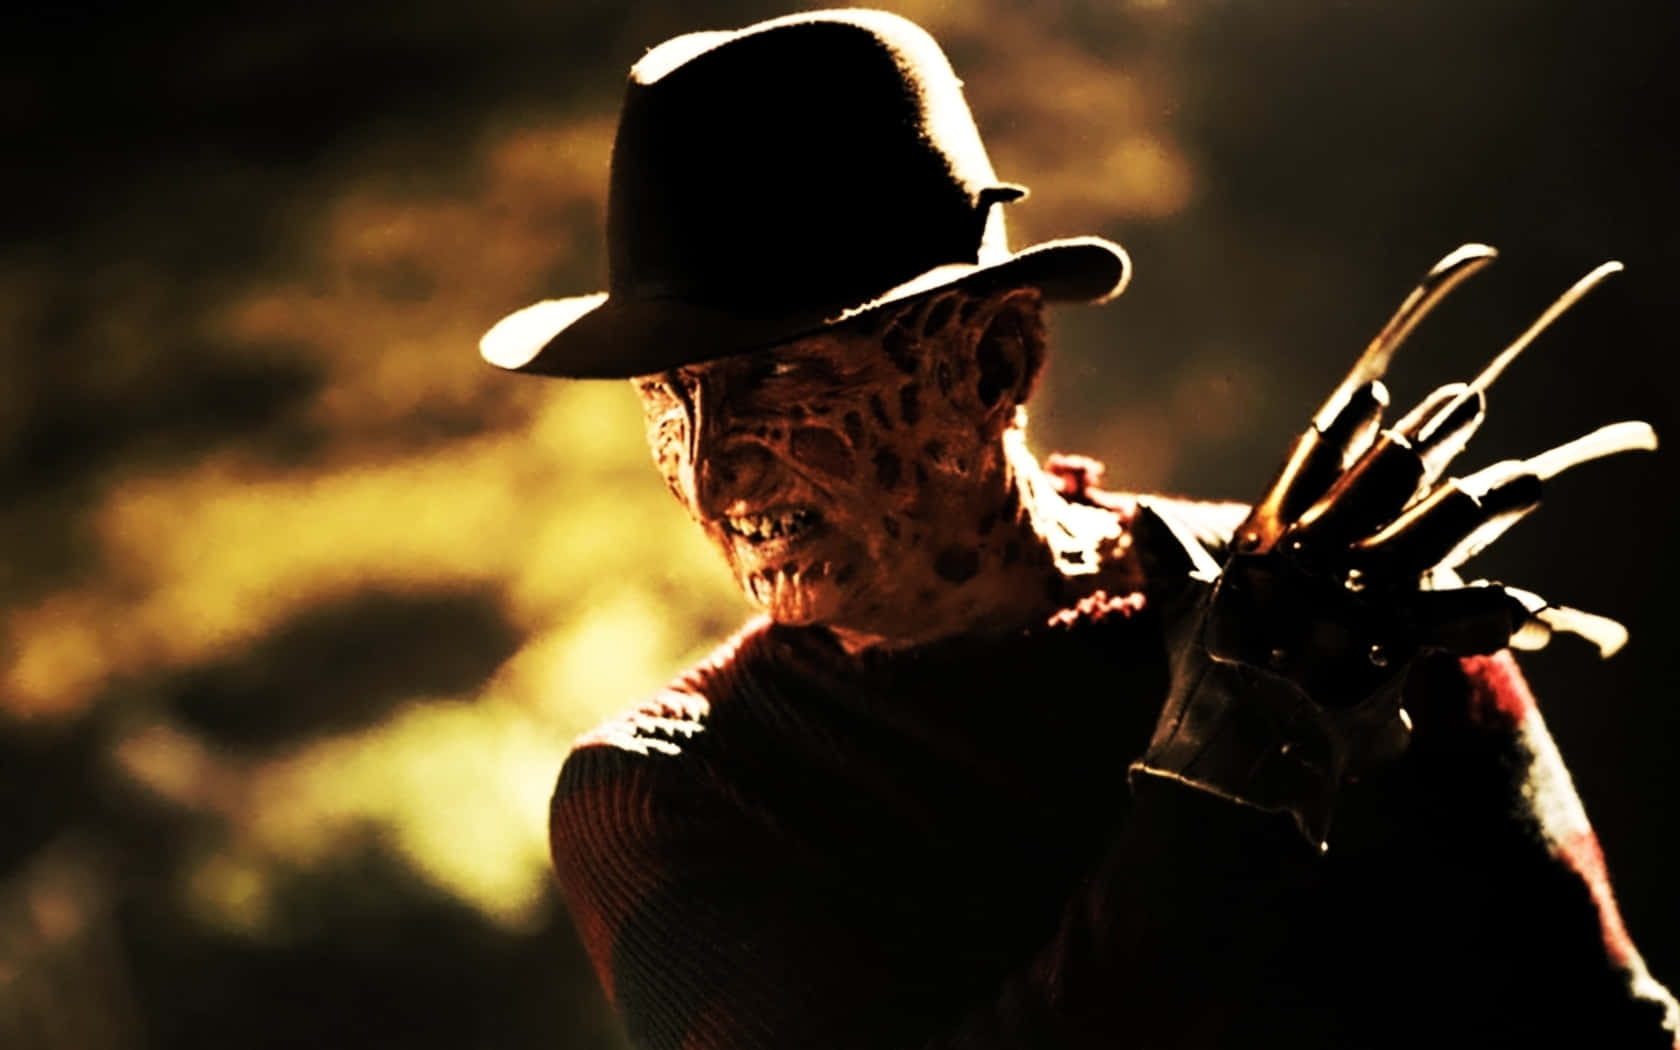 Caption: The iconic Freddy Krueger standing menacingly in the darkness